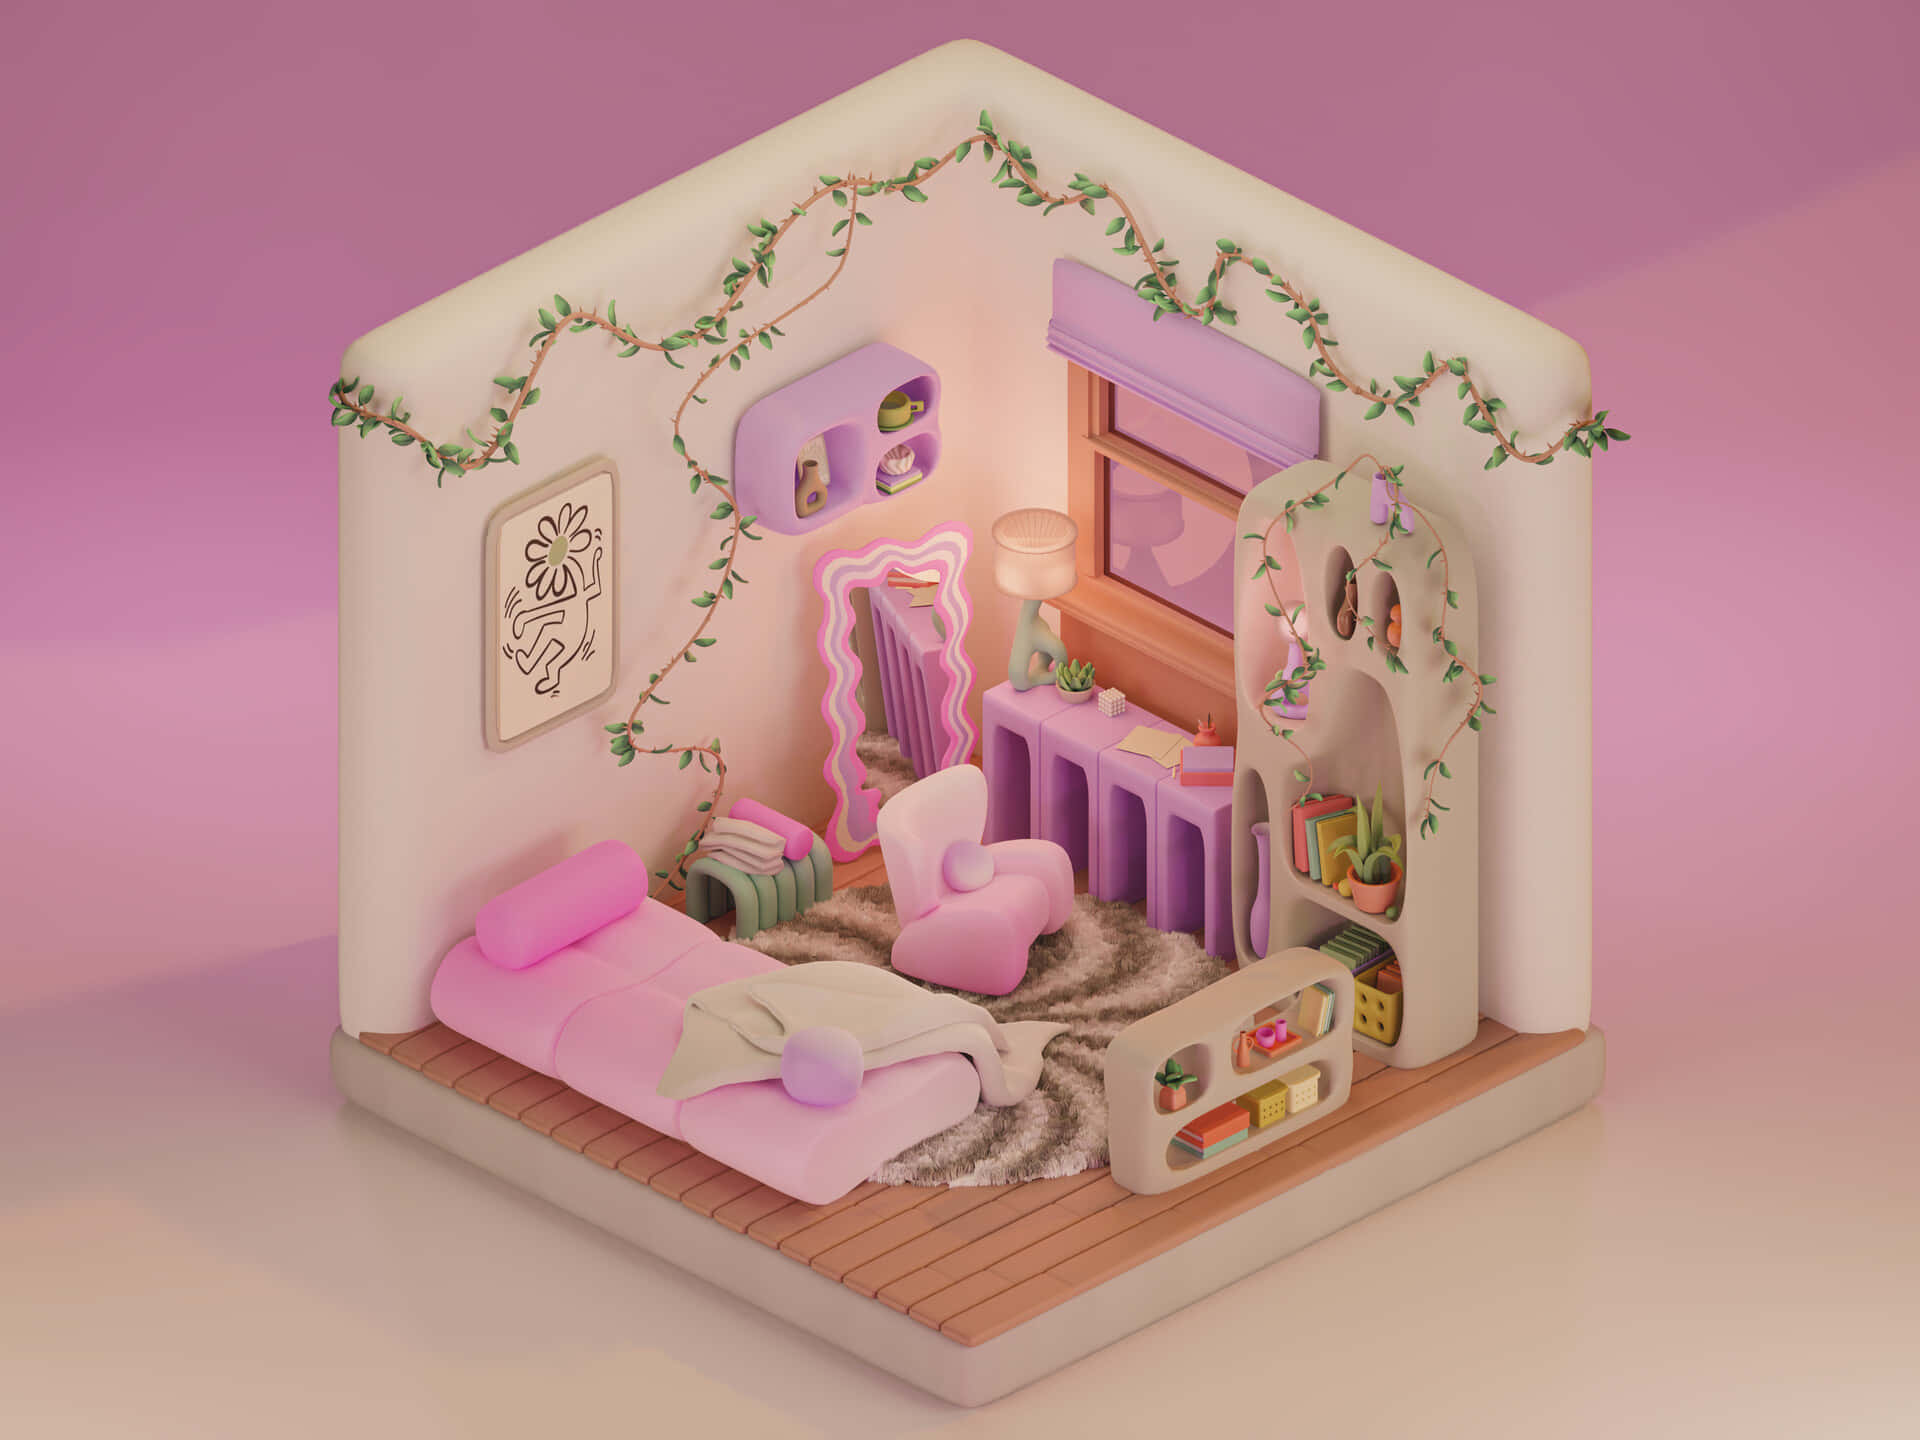 Kawaii Room with Pink Elements and Cute Decor Wallpaper